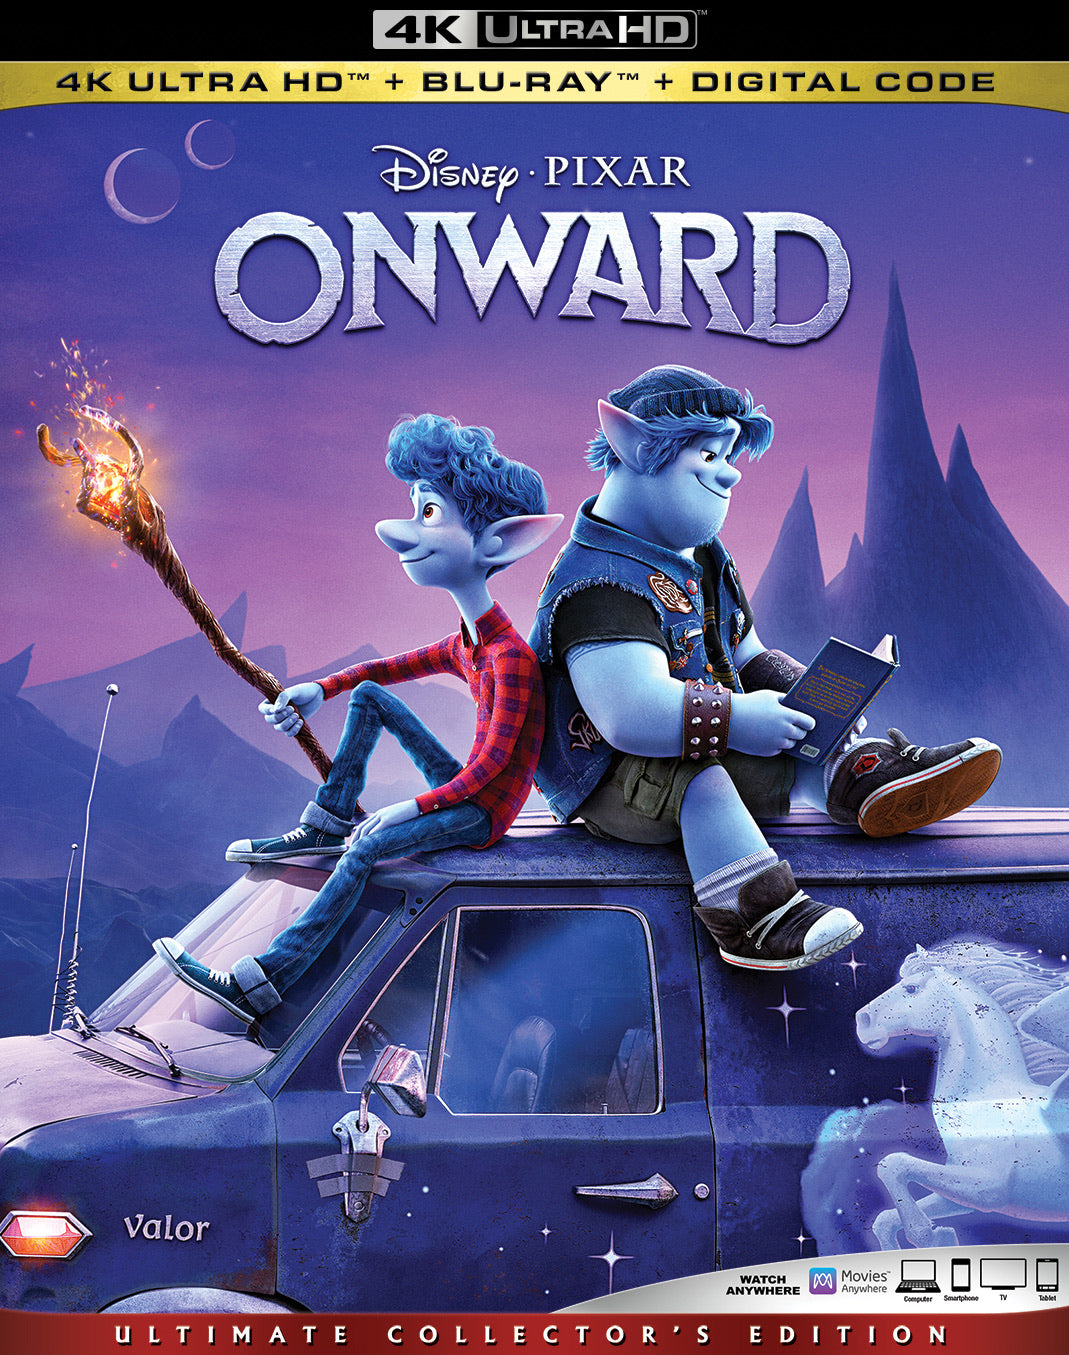 Onward (2020) Vudu or Movies Anywhere 4K redemption only